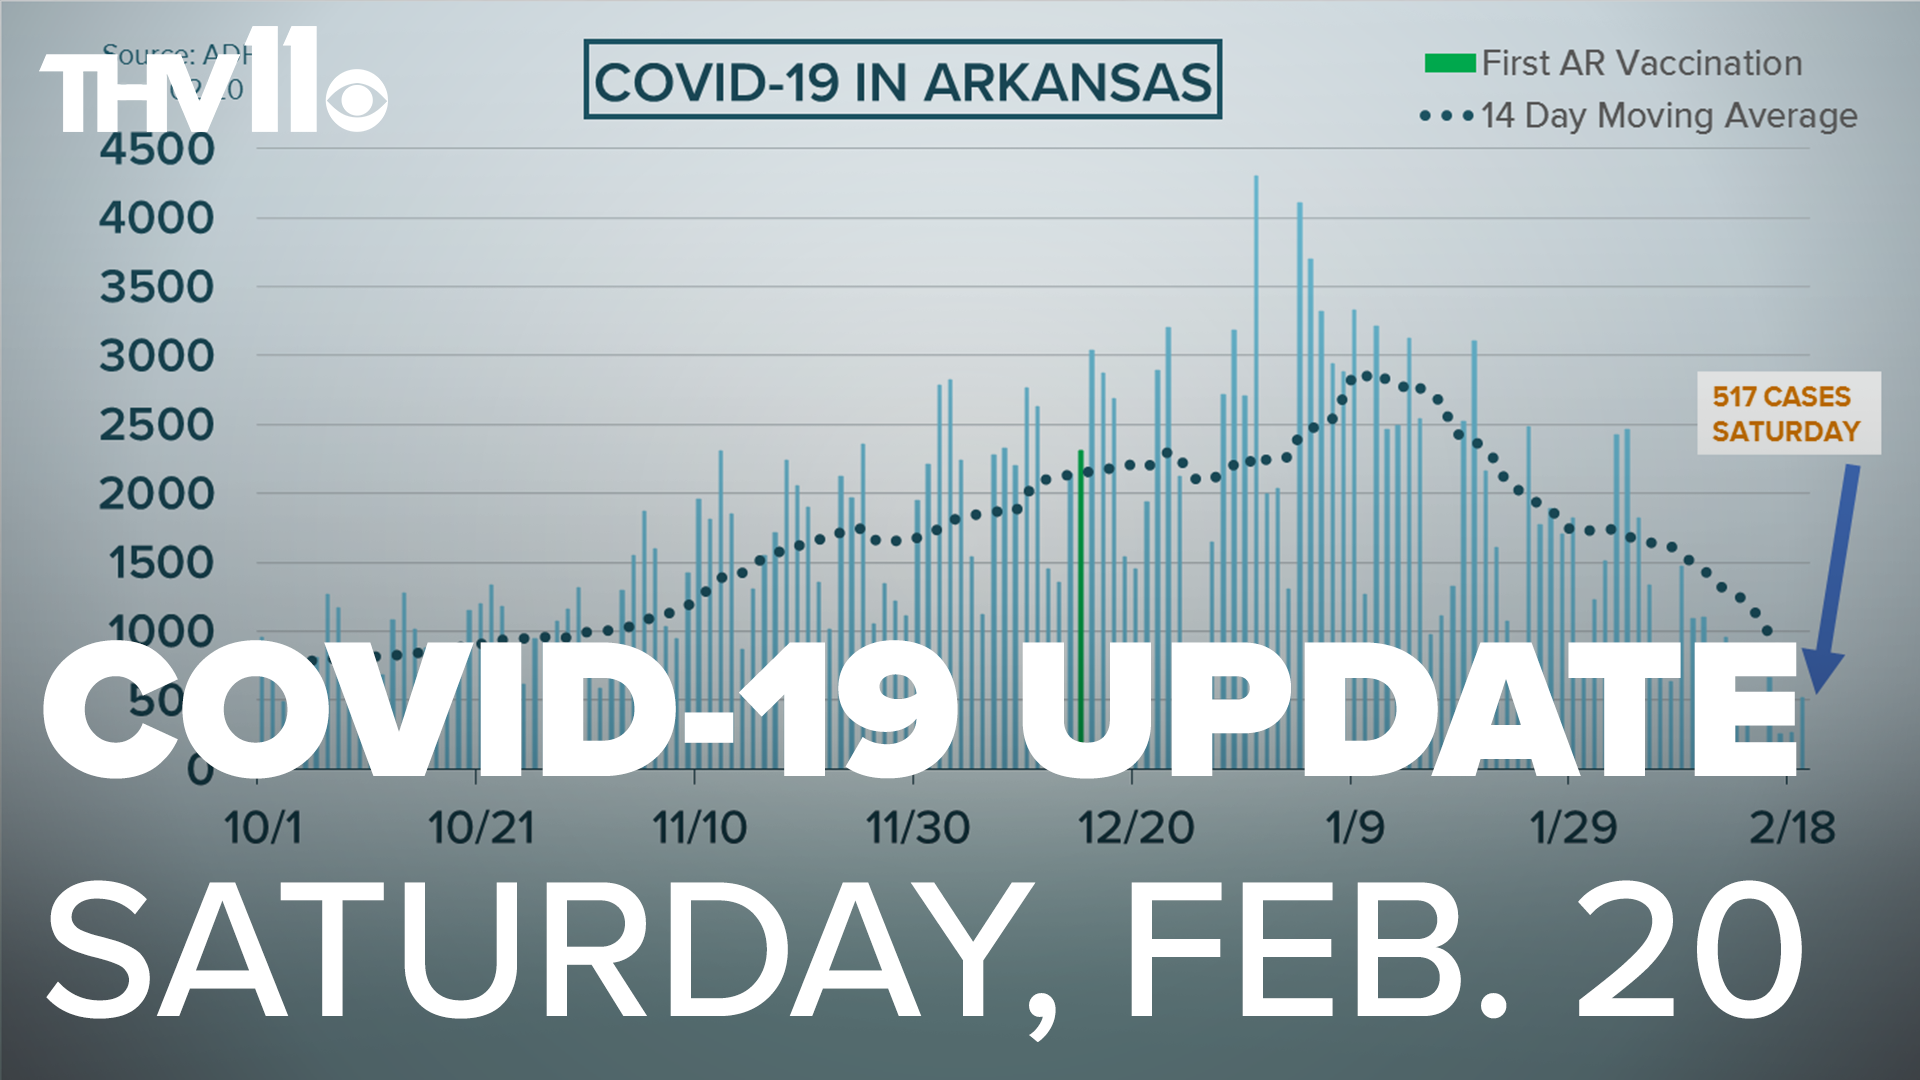 Melissa Zygowicz provides an update on the coronavirus in Arkansas for Saturday, February 20.